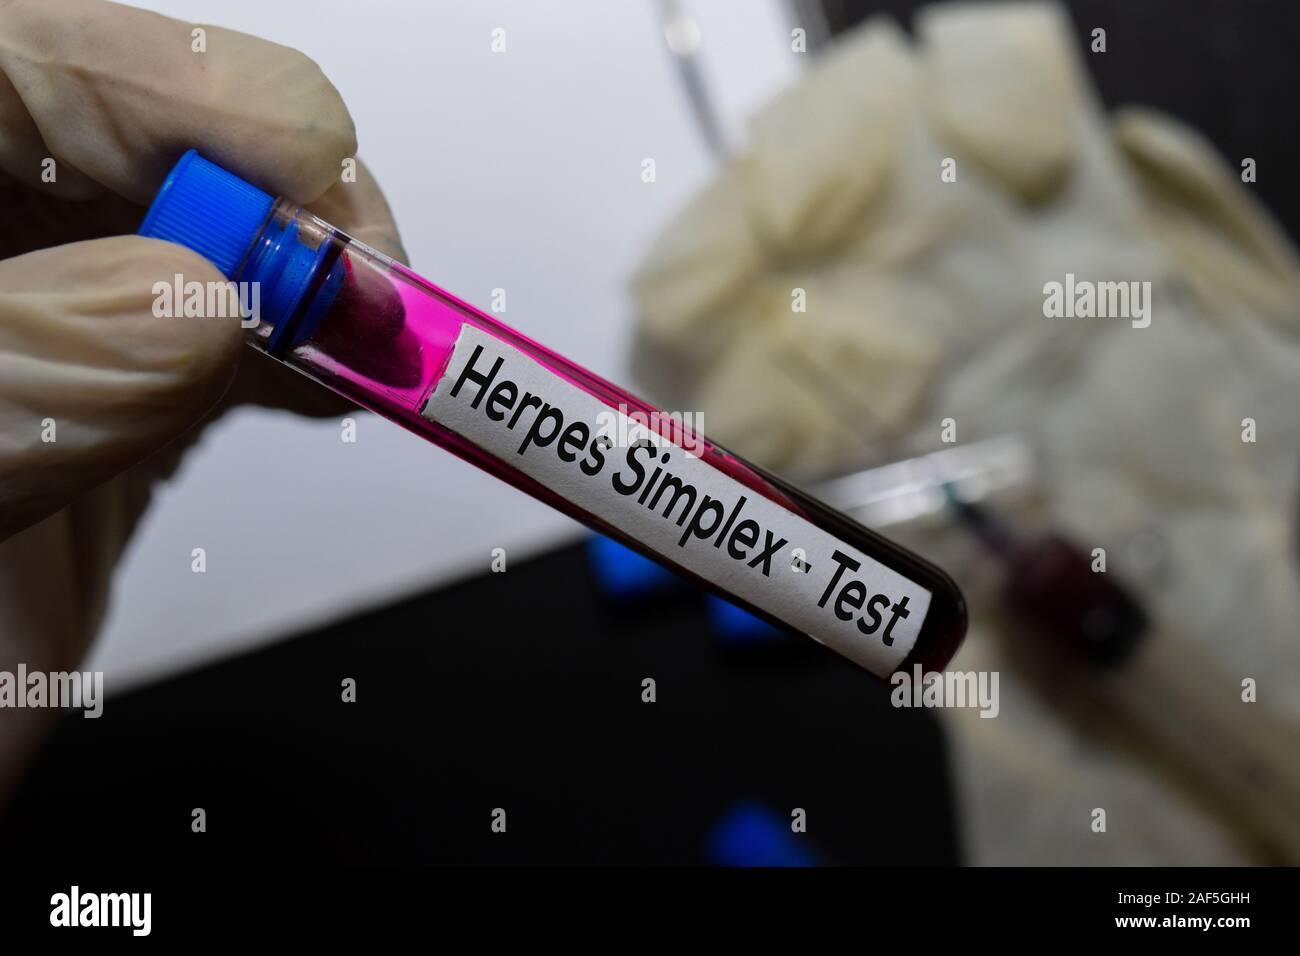 Herpes Simplex - Test with blood sample. Top view isolated on office desk. Healthcare/Medical concept Stock Photo